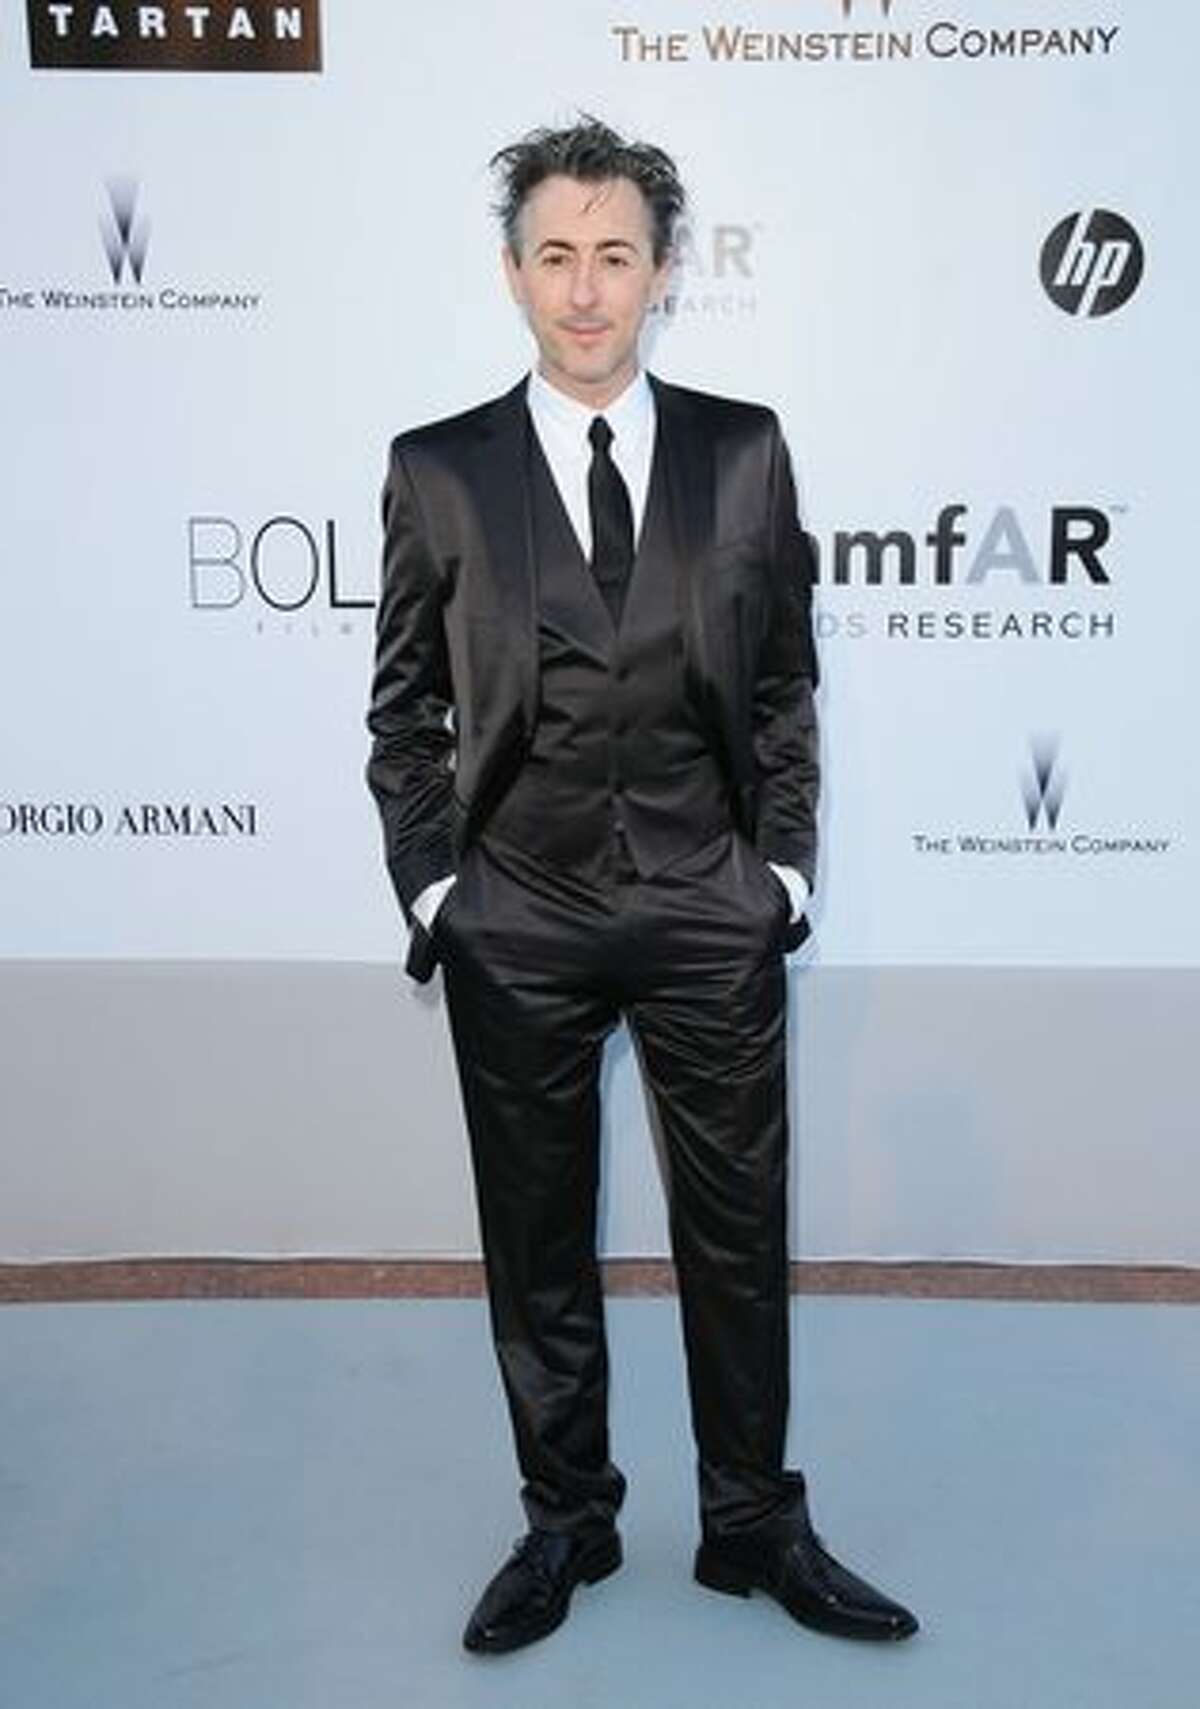 Actor Alan Cumming arrives at amfAR's Cinema Against AIDS 2010 benefit gala at the Hotel du Cap on May 20, 2010 in Antibes, France.